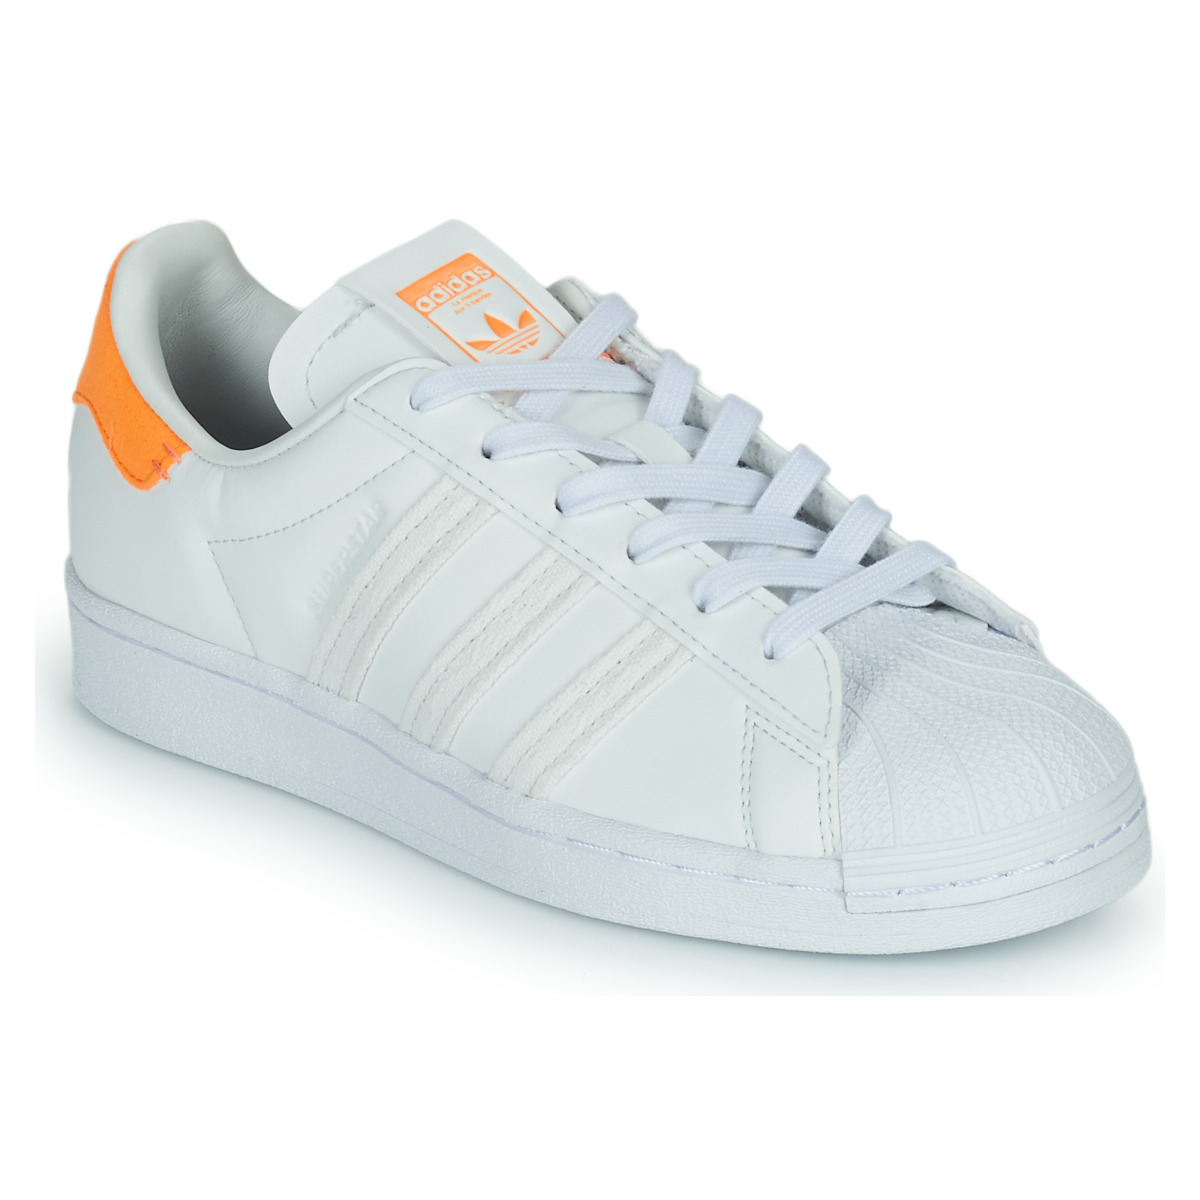 adidas Originals SUPERSTAR W NET Low Women - | delivery Spartoo / - Orange Free Shoes top ! White trainers